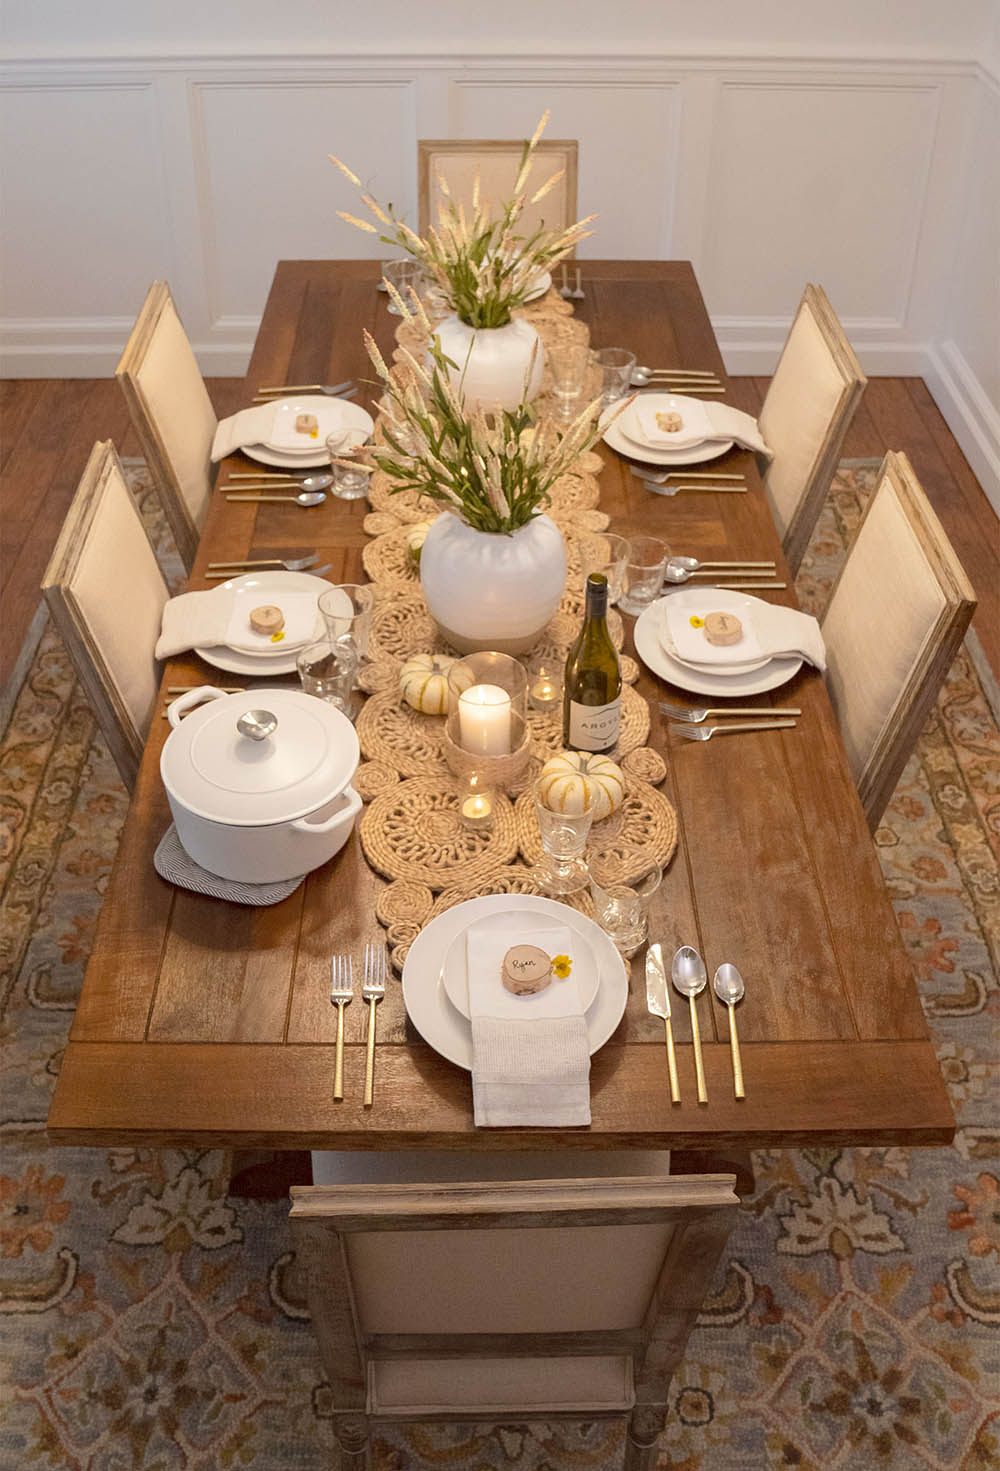 A wooden dining room table decorated with white dishes, silver flatware, candles, and miniature pumpkins for Friendsgiving.